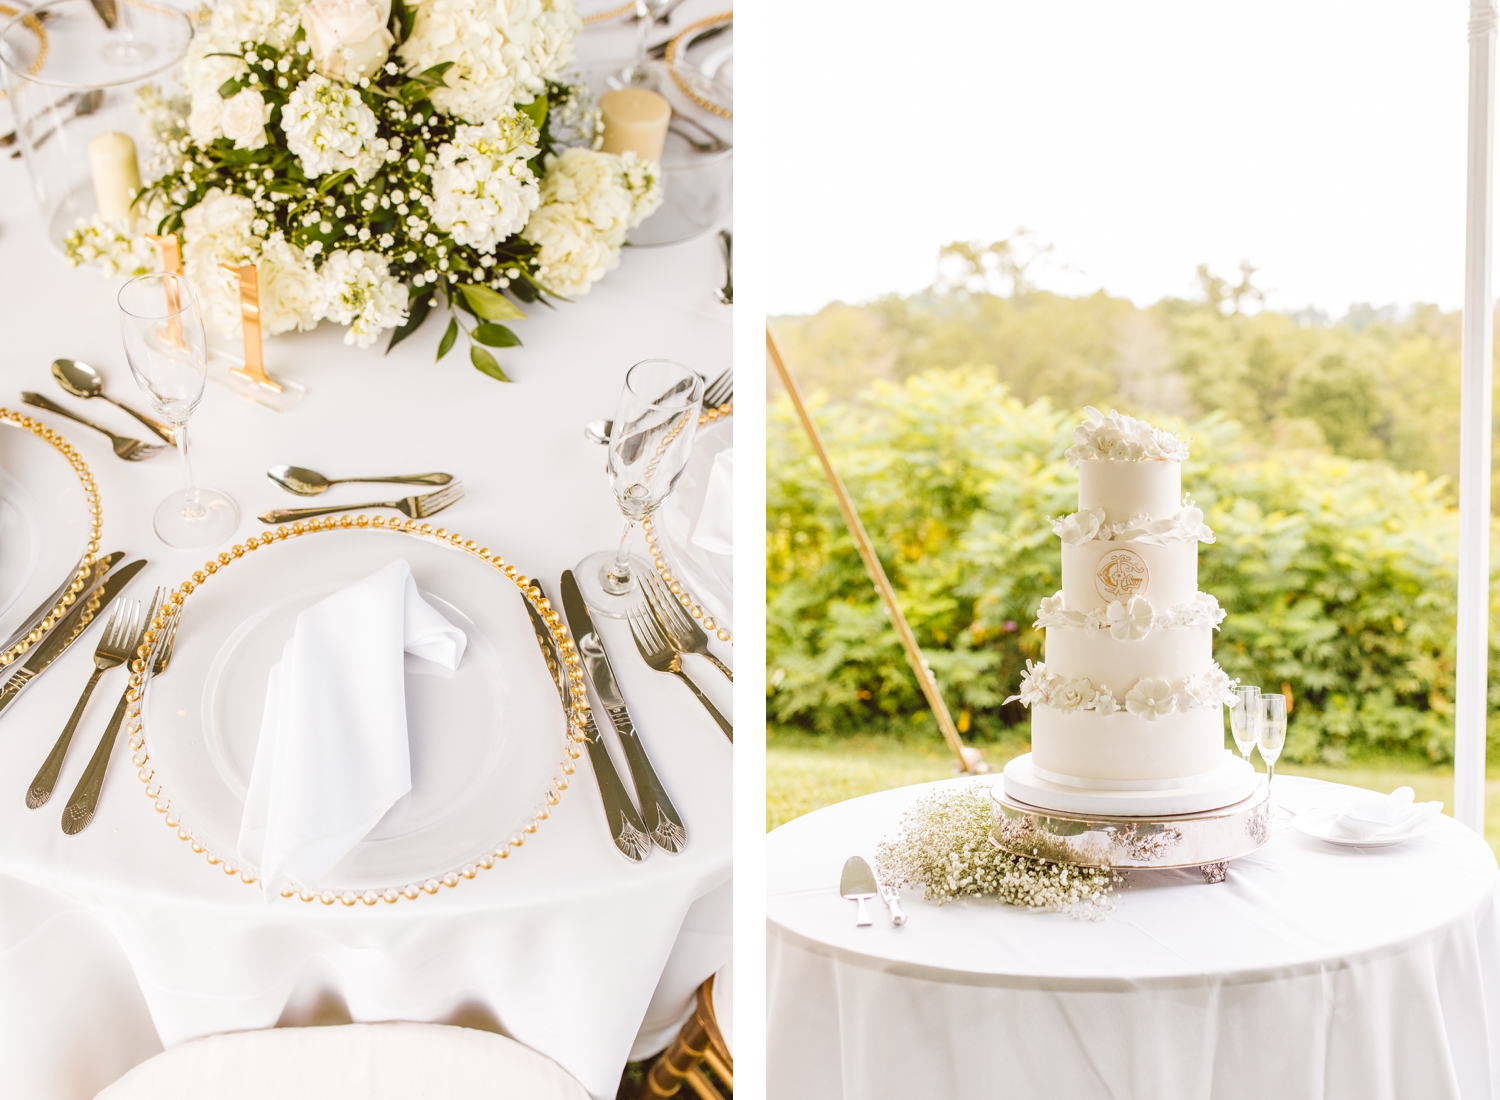 Gold place settings with gold charger and white floral arrangement | four tier white wedding cake with white flowers | Brooke Michelle Photo